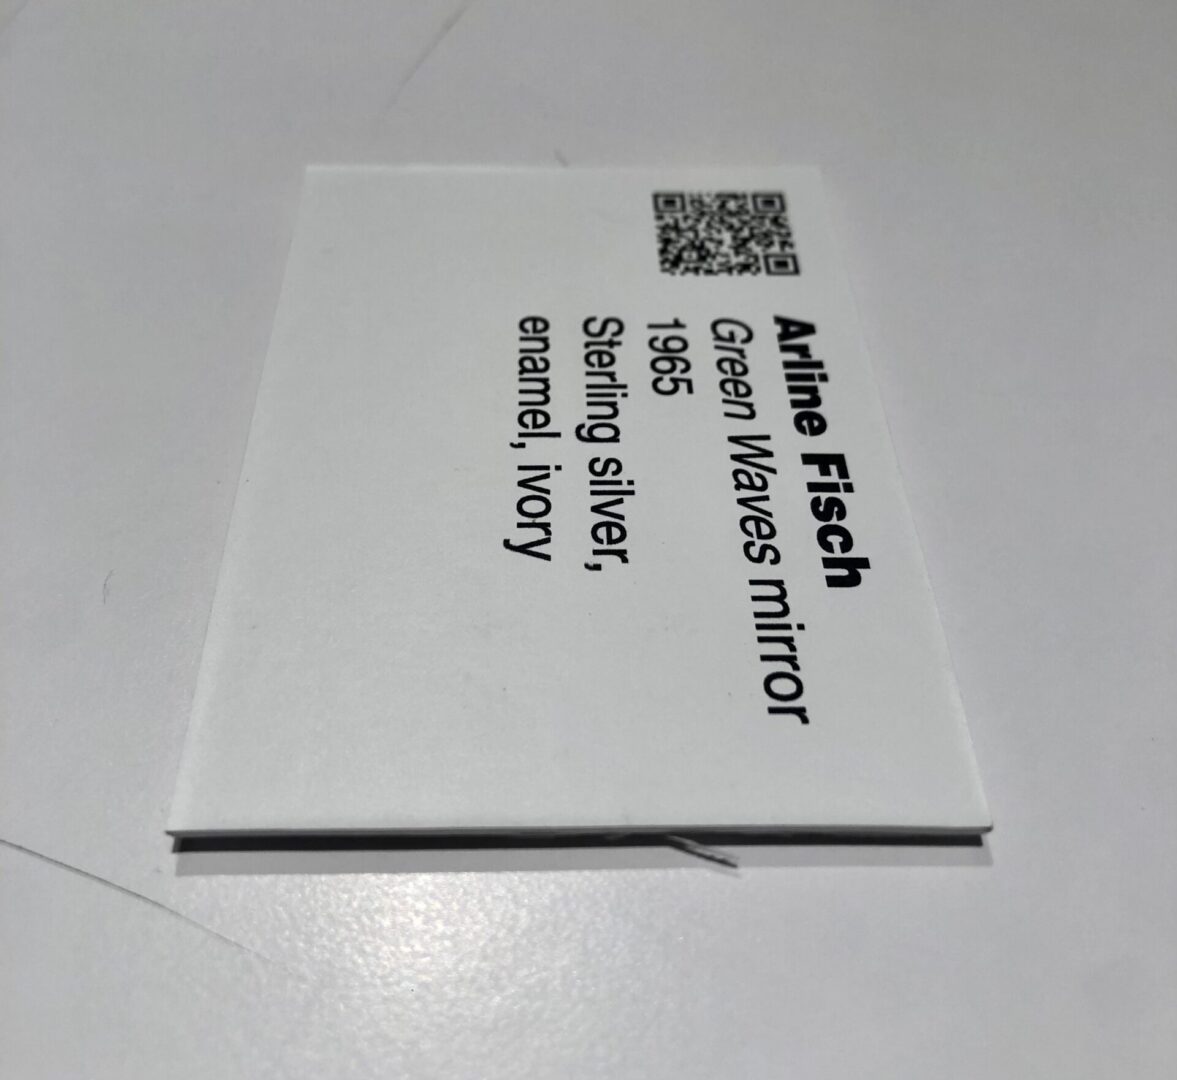 A business card with the name of the company and qr code.